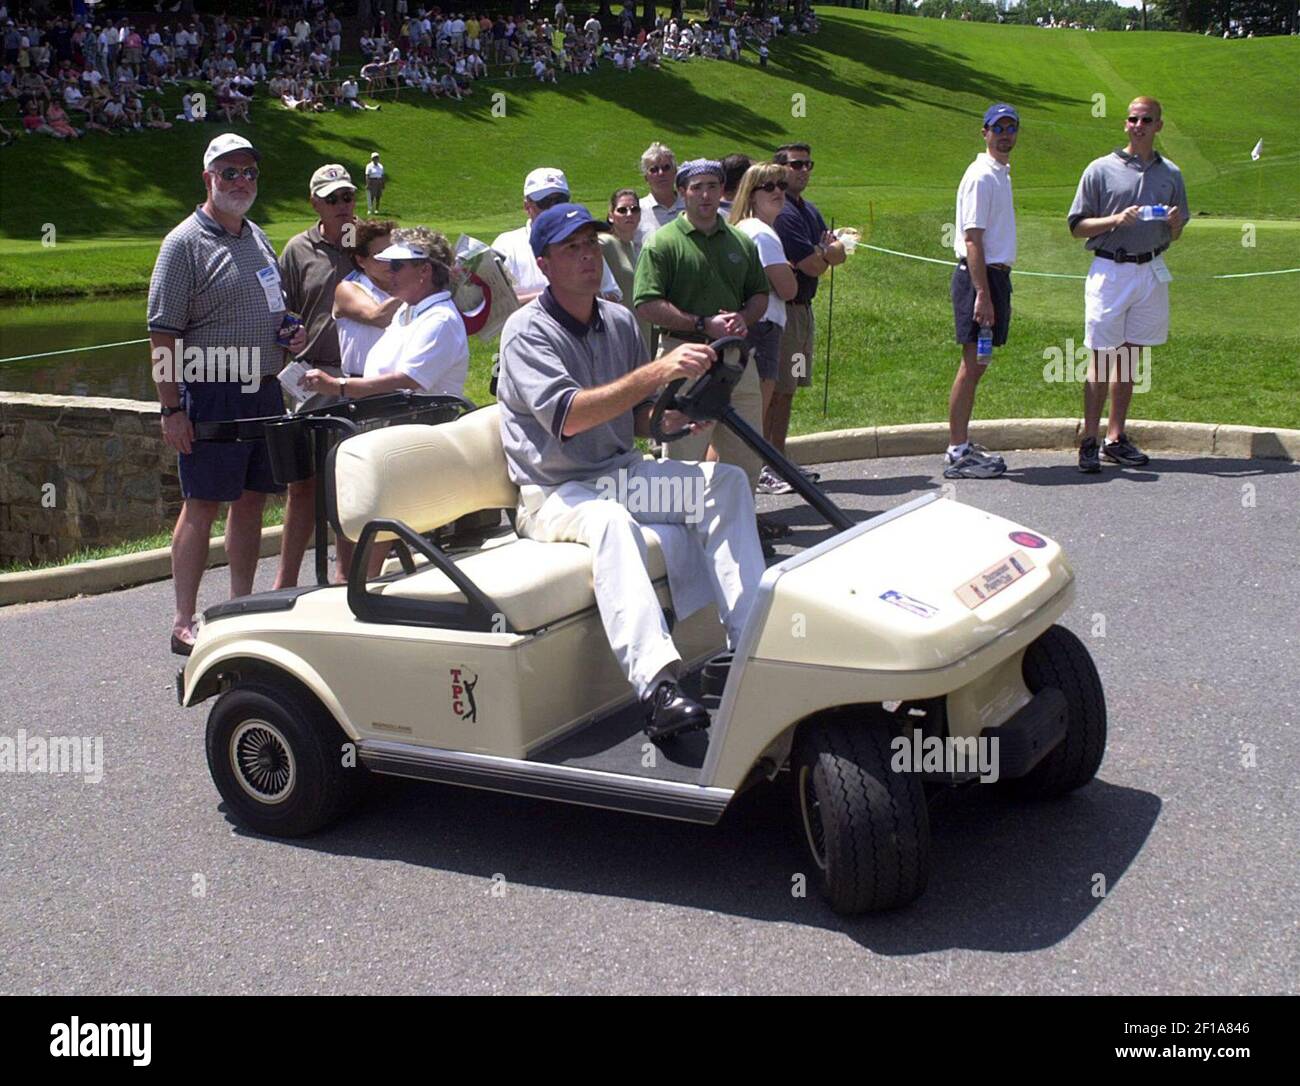 KRT SPORTS STORY SLUGGED: MARTIN KRT PHOTO BY STEVE DESLICH/KRT (May 29)  Golfer Casey Martin is seated in his golf cart during the third round of  the Kemper Insurance Open on June